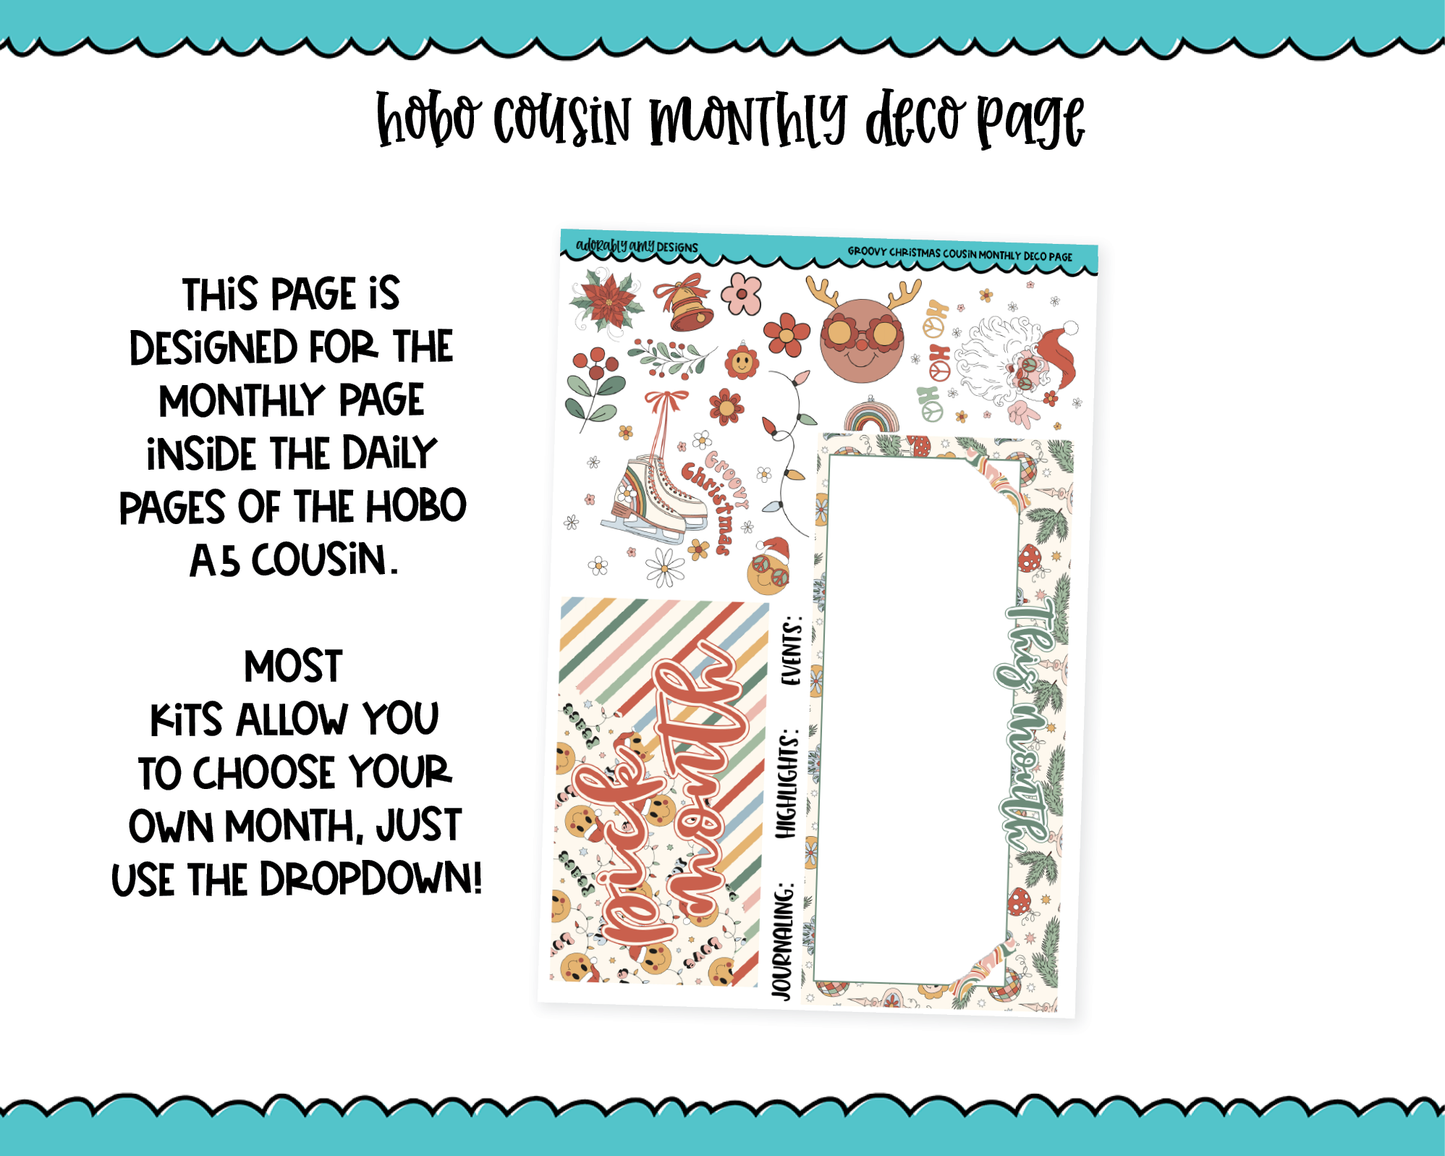 Hobonichi Cousin Monthly Pick Your Month Groovy Christmas Planner Sticker Kit for Hobo Cousin or Similar Planners